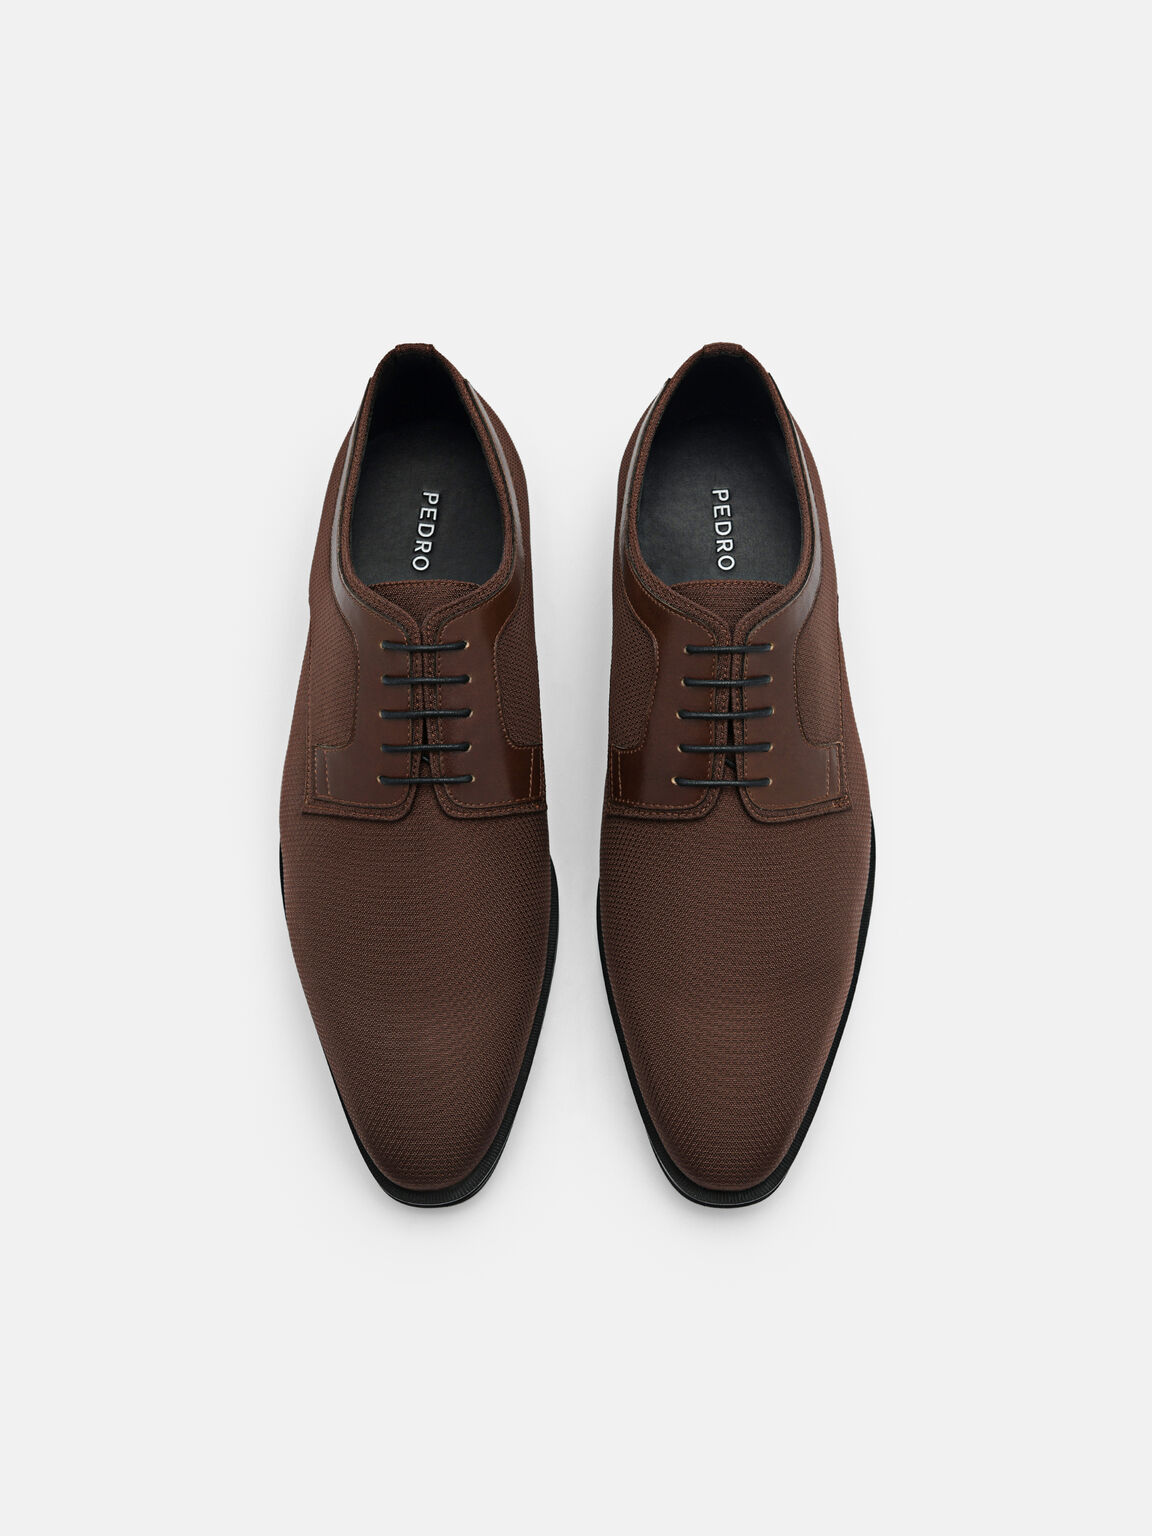 Nylon and Leather Derby Shoes, Dark Brown, hi-res